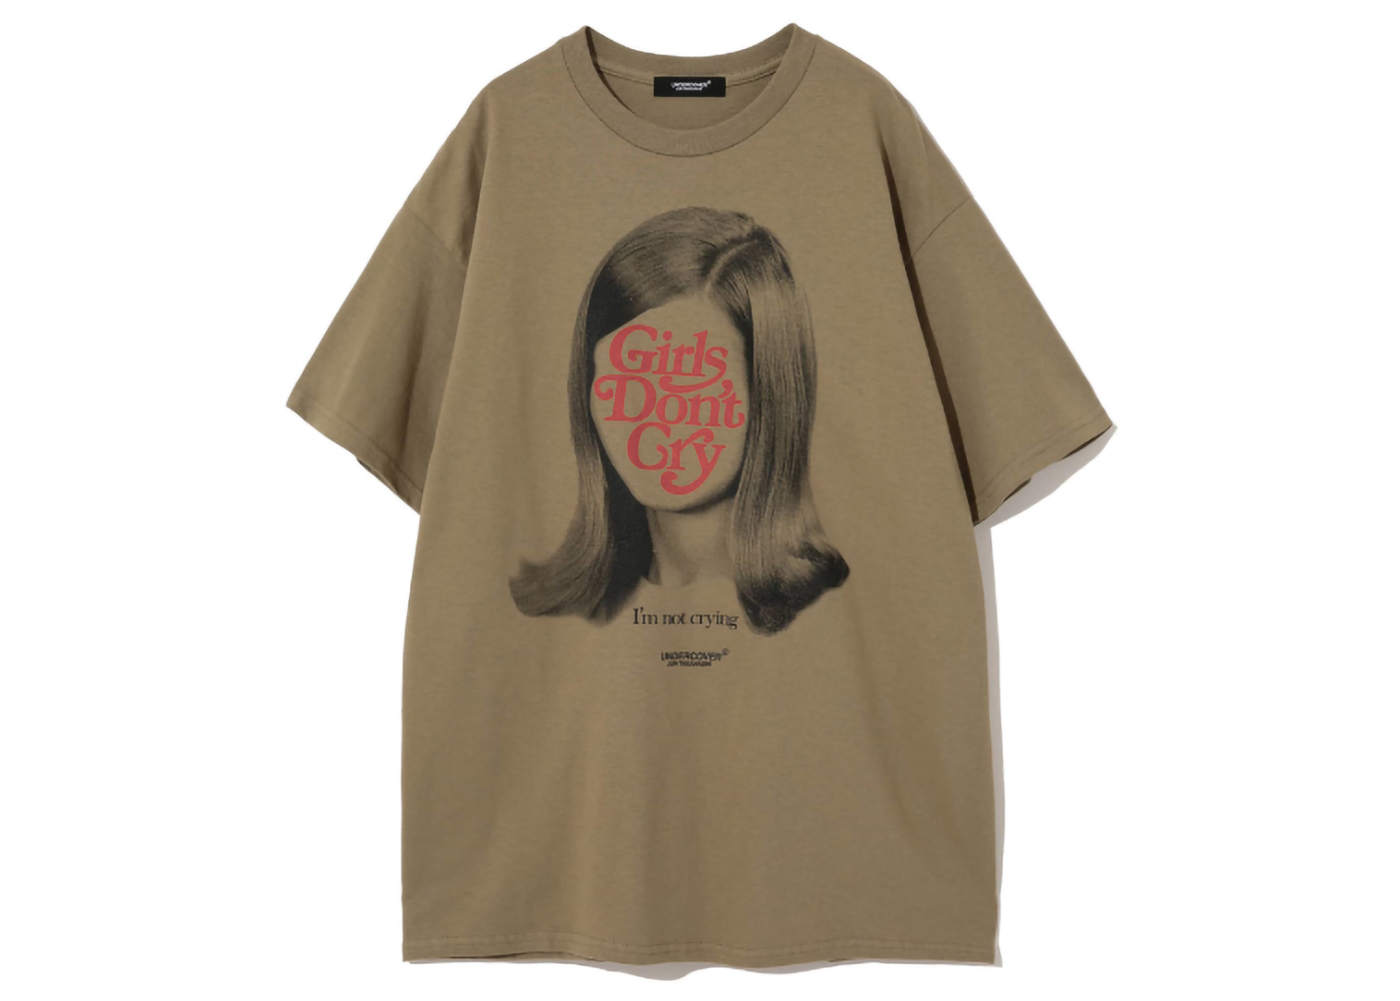 Undercover x Verdy Girls Don't Cry T-Shirt Beige